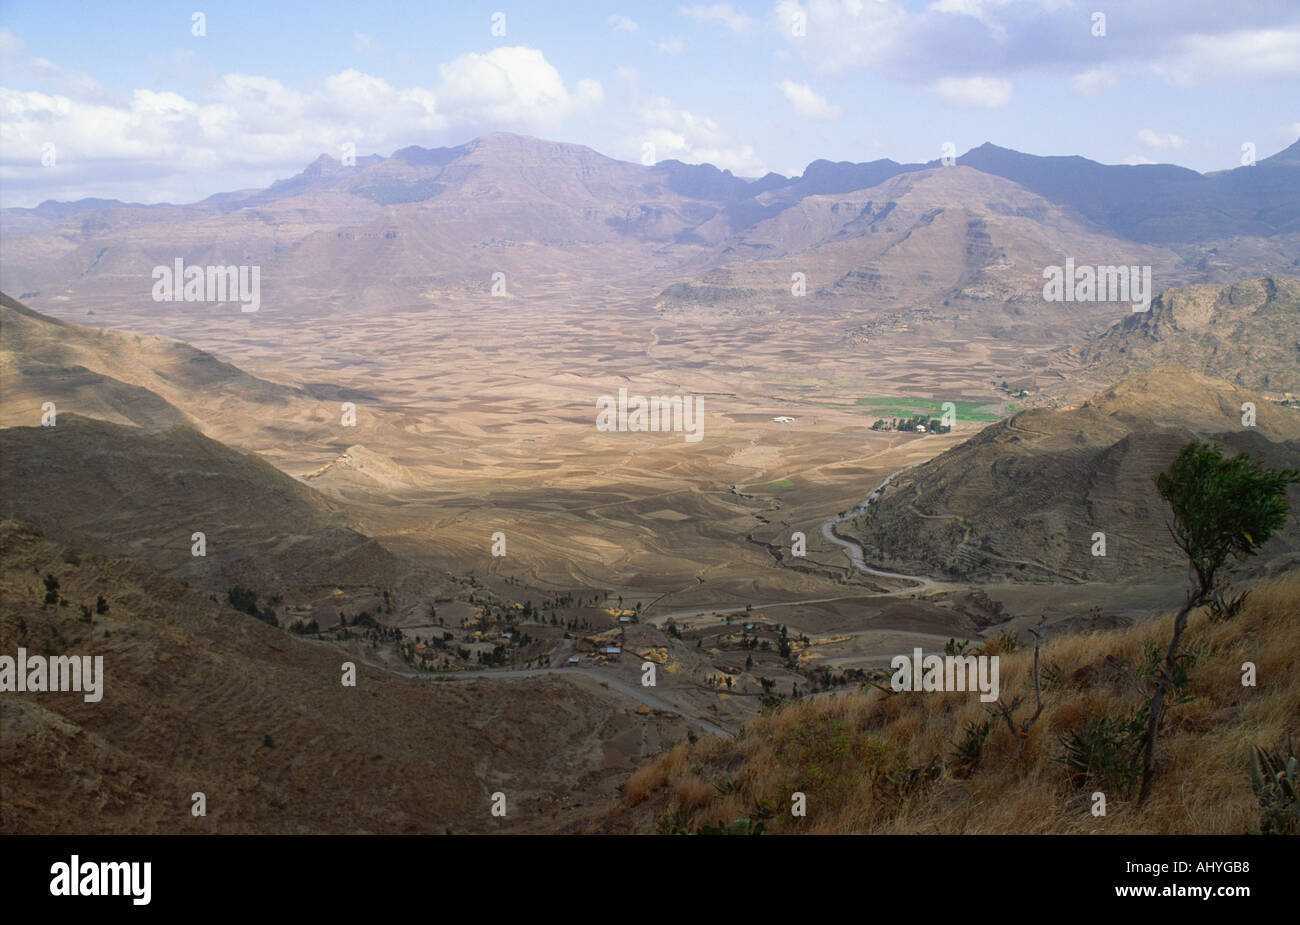 A landscape of barren, deforested hills in the Great Rift Valley, Tigray, Northern Ethiopia Stock Photo